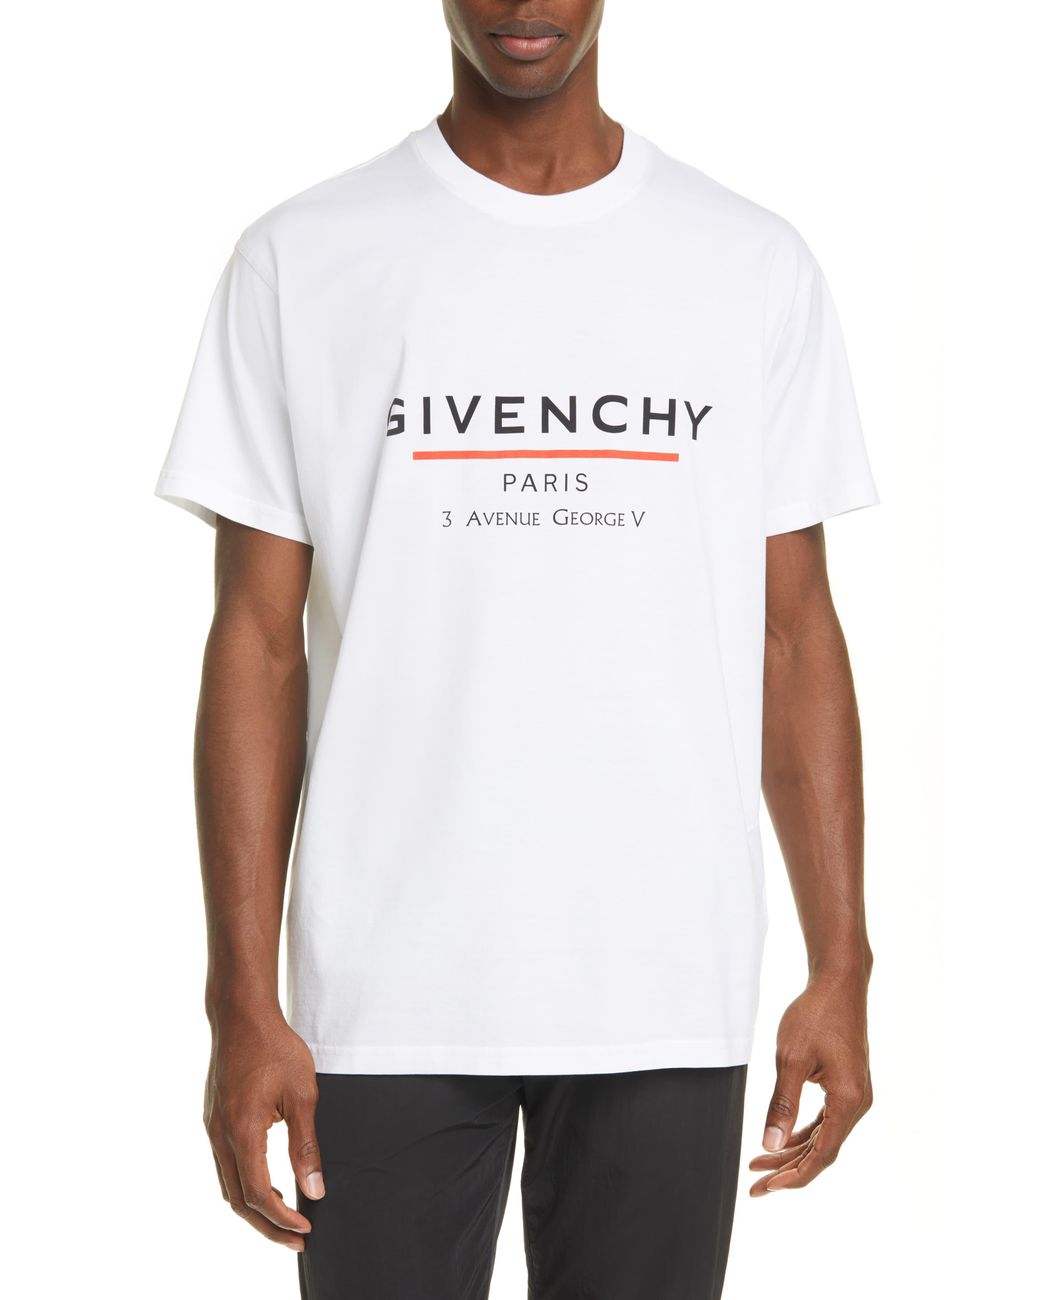 Givenchy T-shirt In White Cotton for Men - Lyst